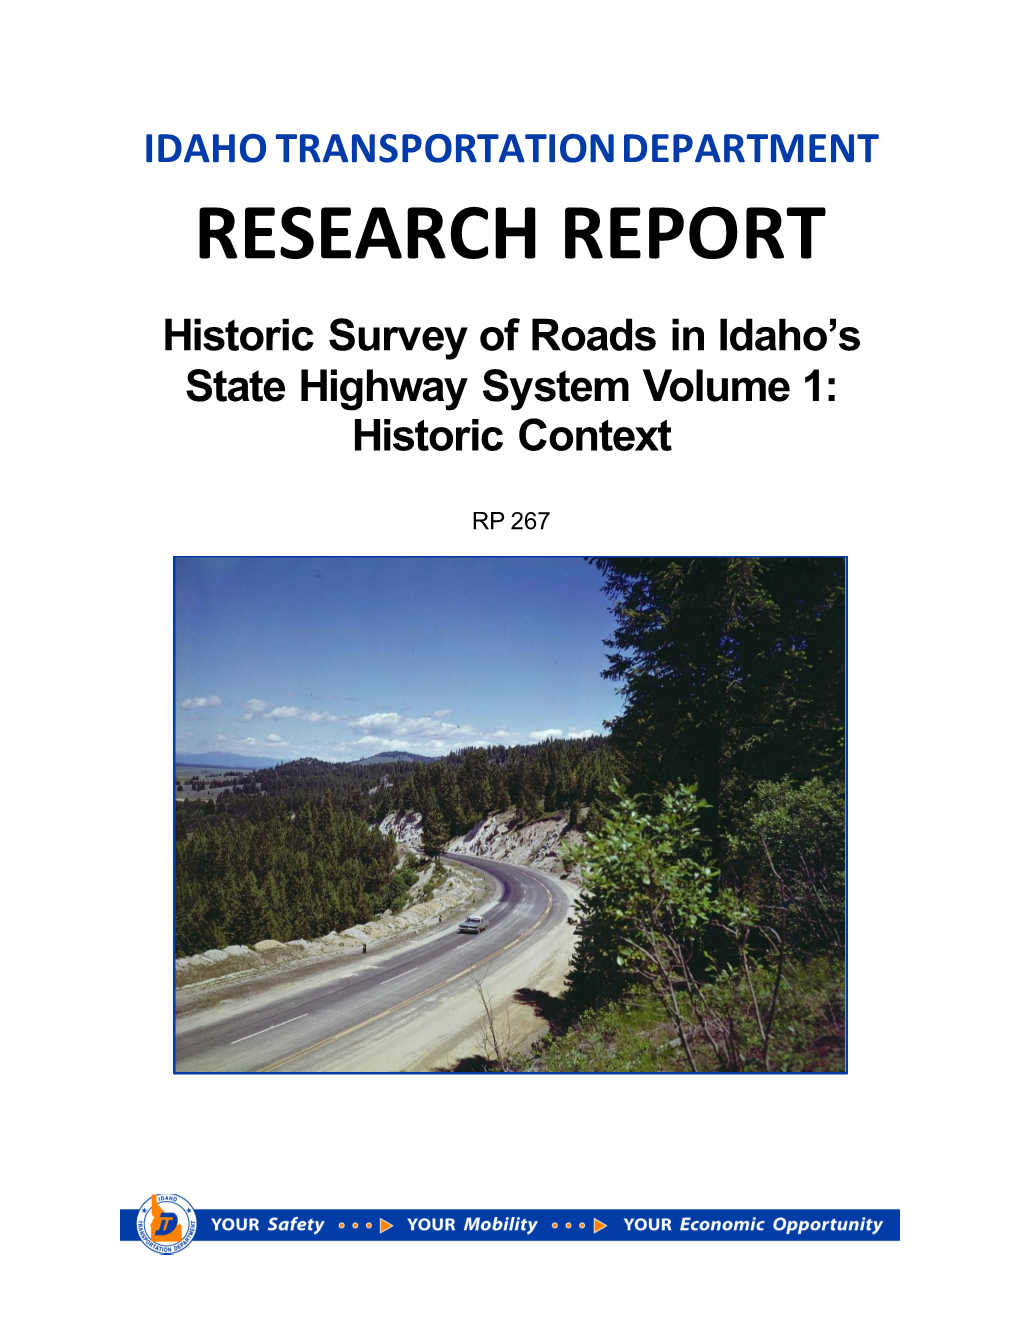 Historic Survey of Roads in Idaho's State Highway System Volume 1